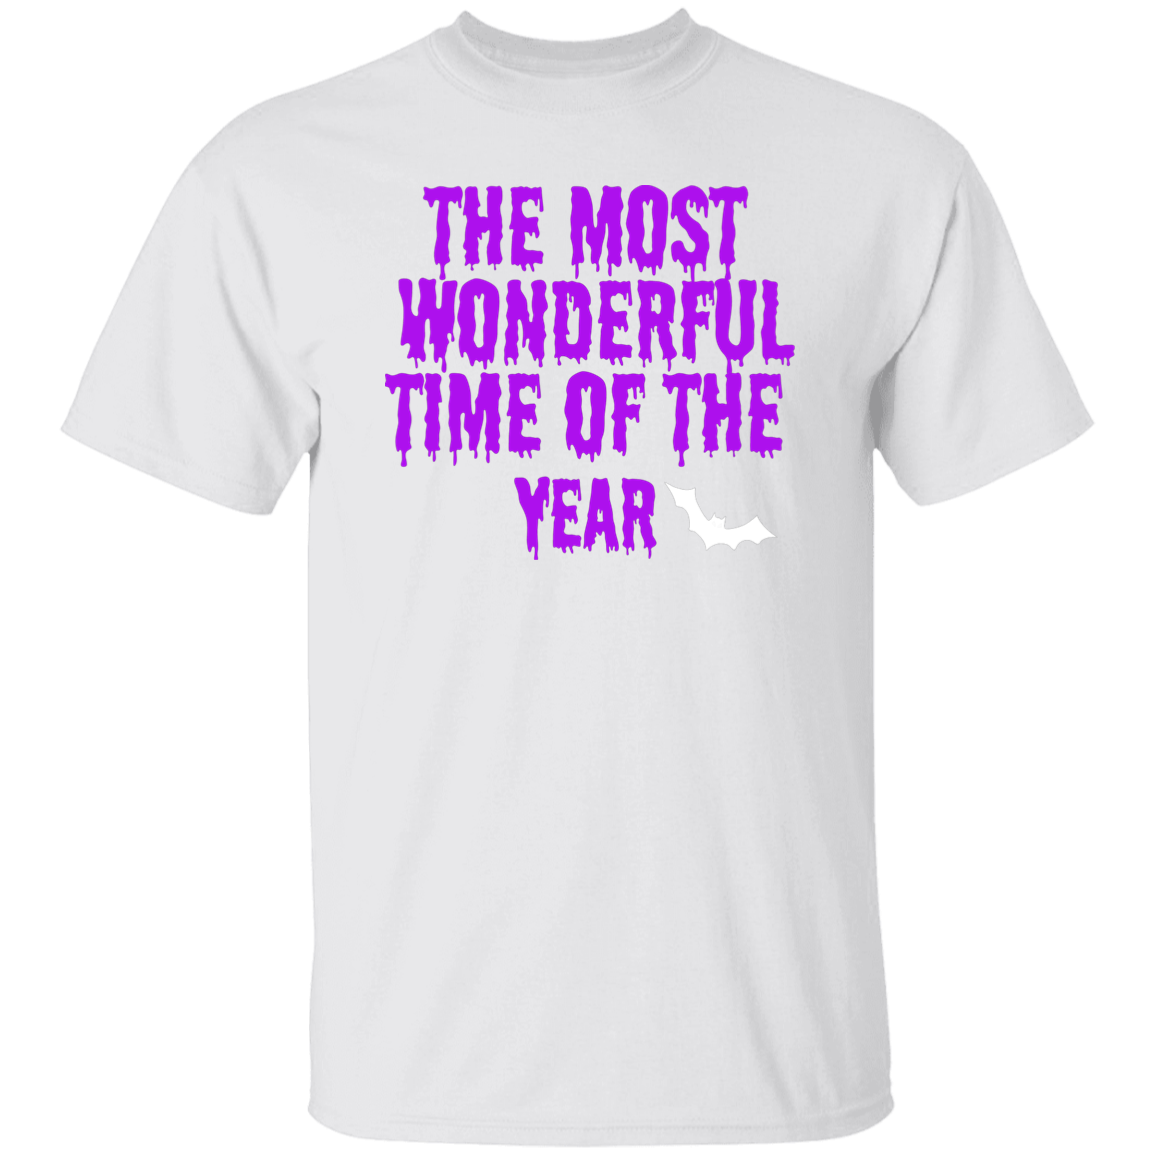 Most Wonderful Time of the Year T-Shirt